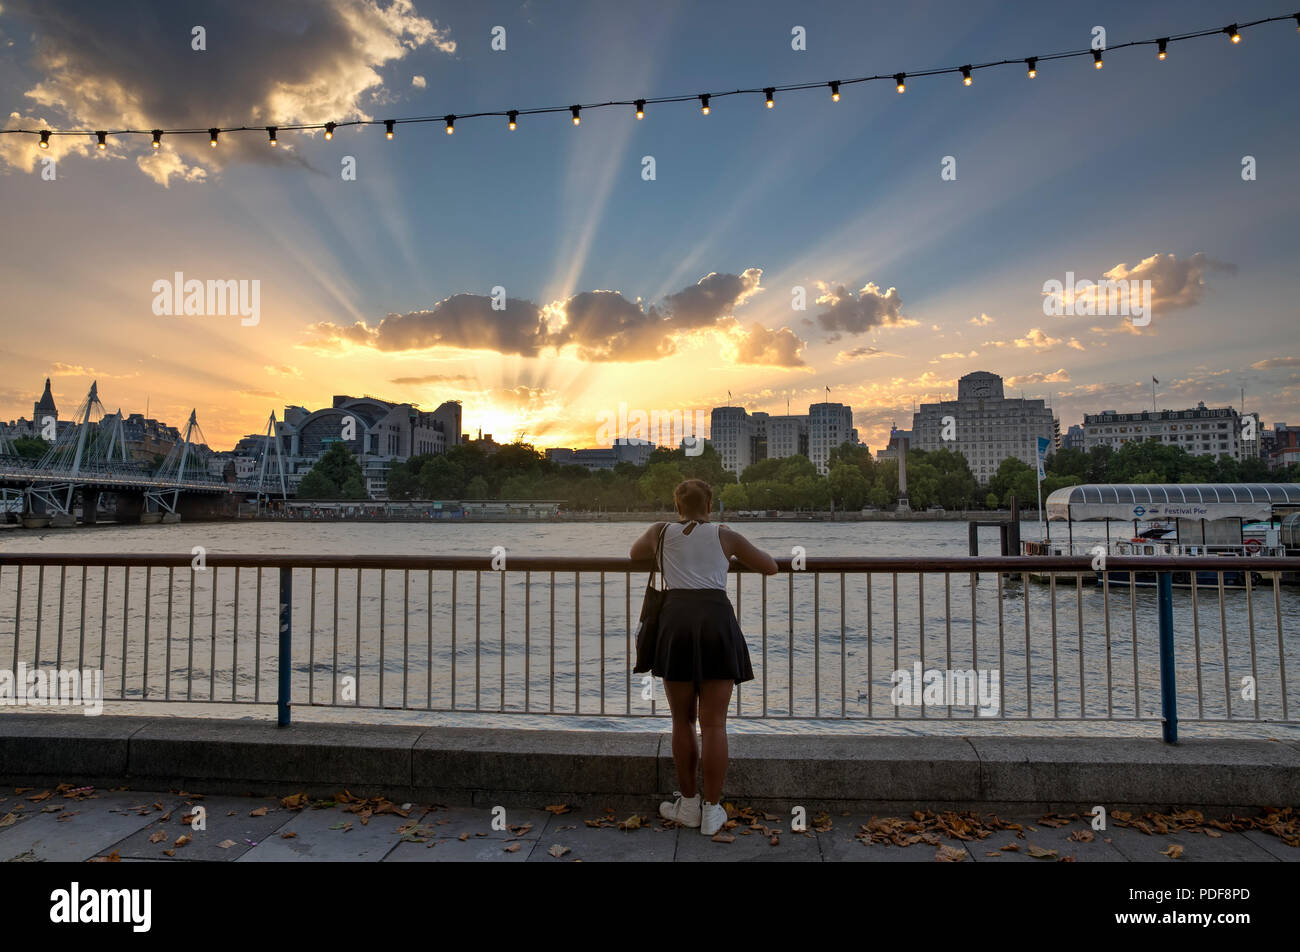 LONDON, UK - AUGUST 6, 2018 :  A young woman on the South Bank of the River Thames looks at the Crepuscular rays as the sun sets behind Charing Cross  Stock Photo